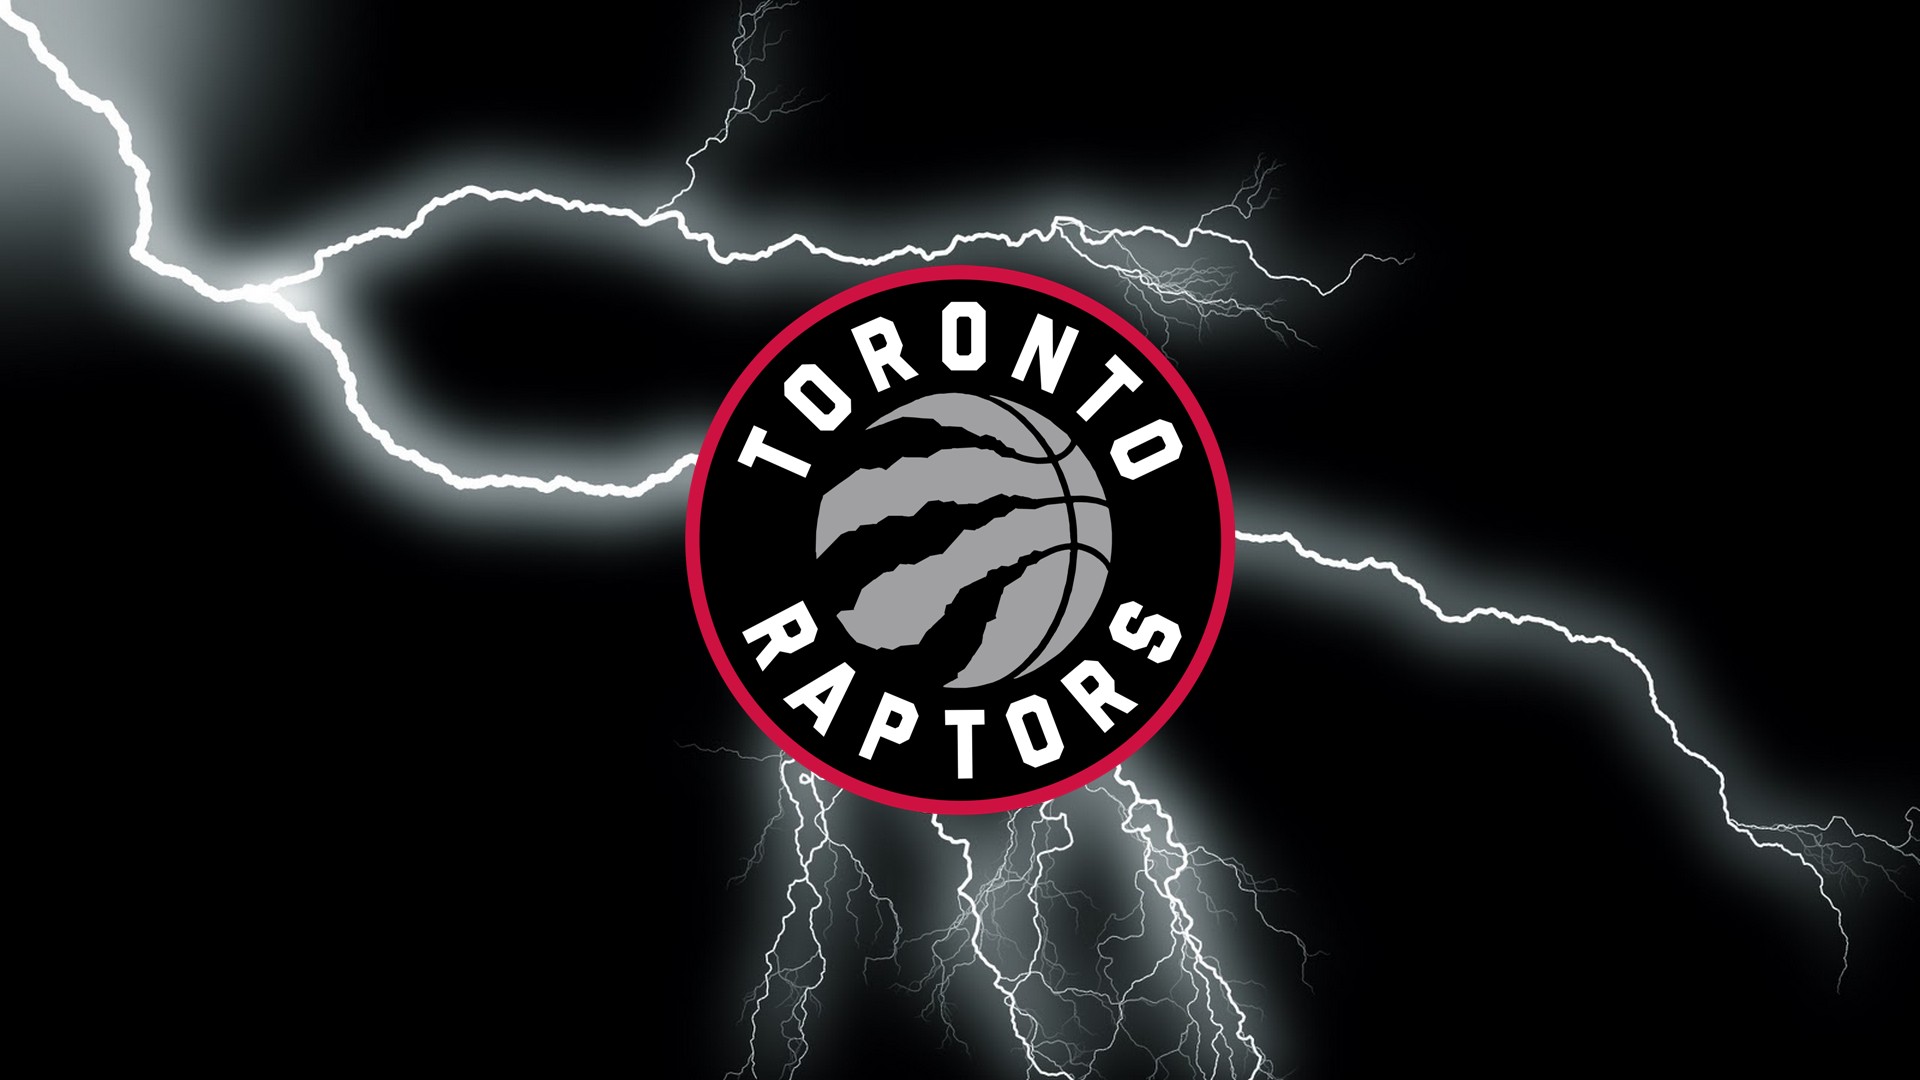 Windows Wallpaper Toronto Raptors Logo with high-resolution 1920x1080 pixel. You can use this wallpaper for your Desktop Computer Backgrounds, Windows or Mac Screensavers, iPhone Lock screen, Tablet or Android and another Mobile Phone device